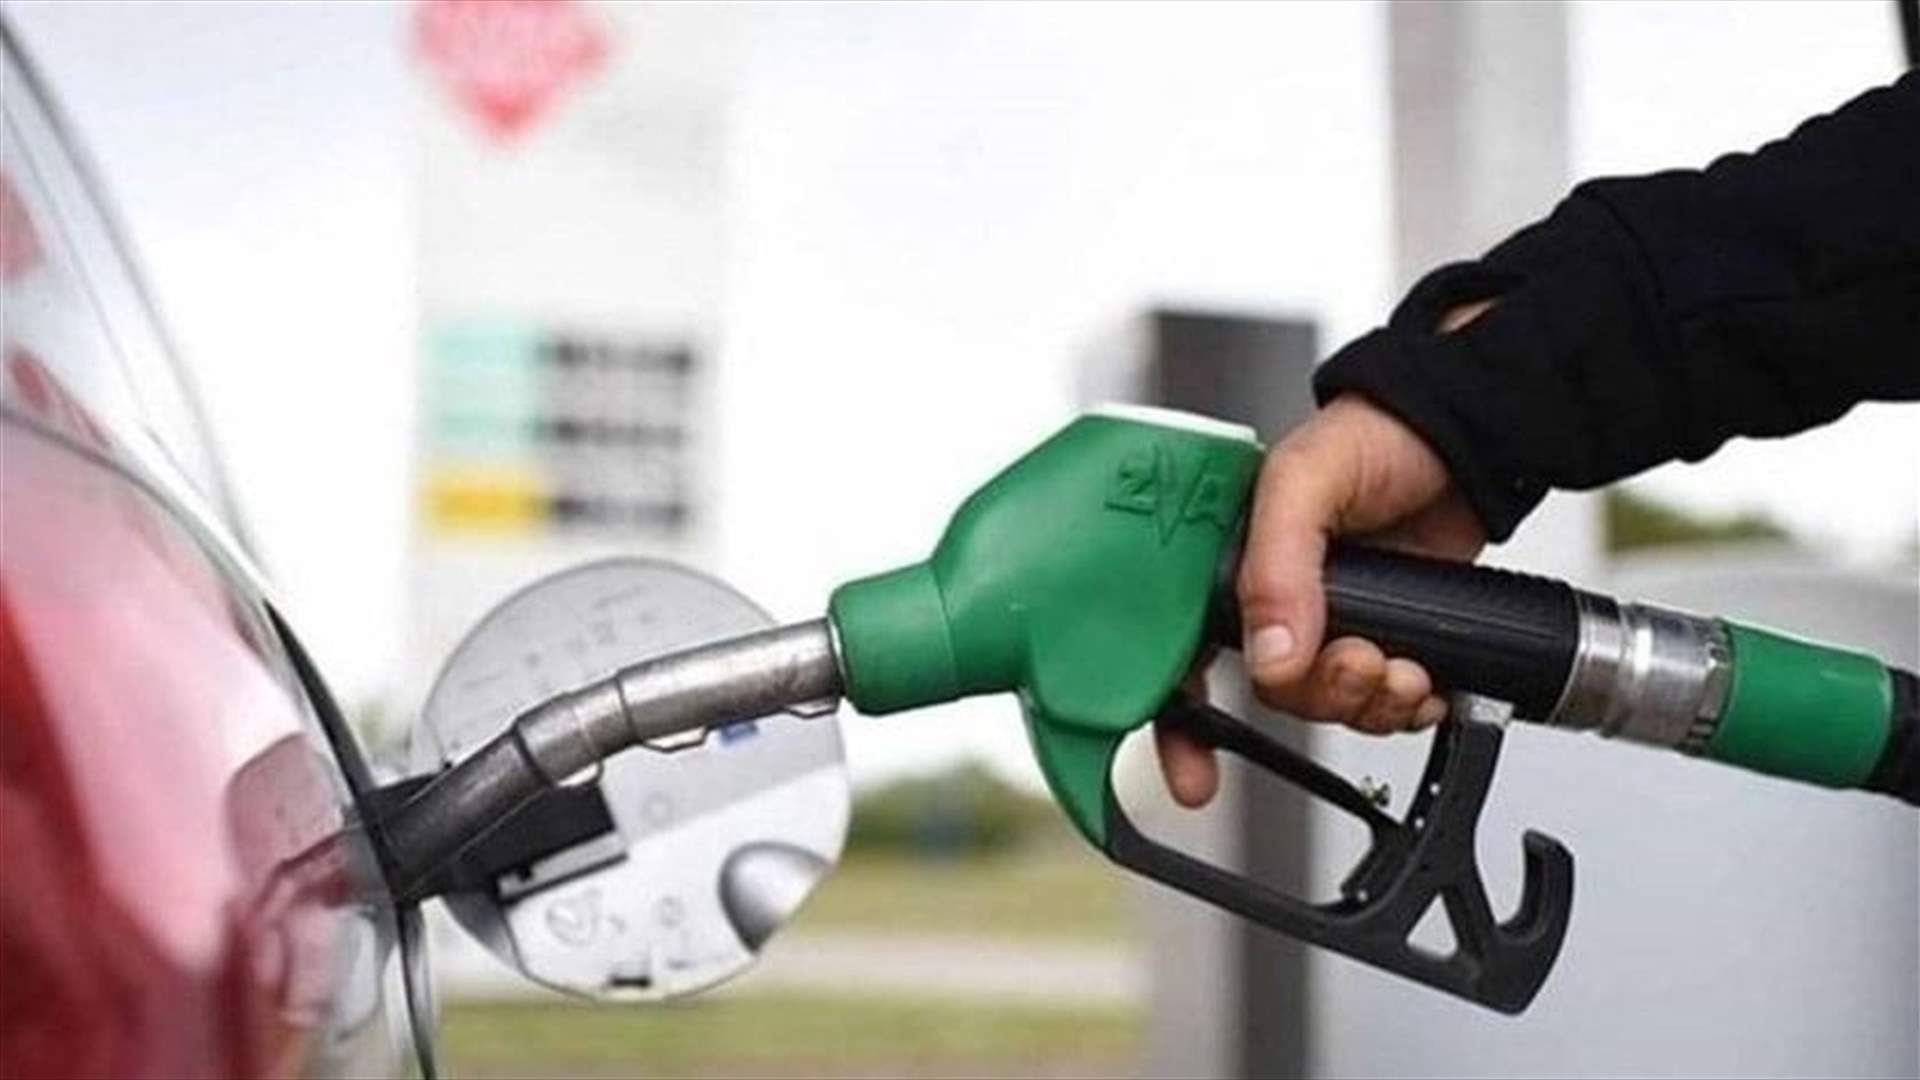 Price of 95 and 98 octane fuel increases 5000 LBP each